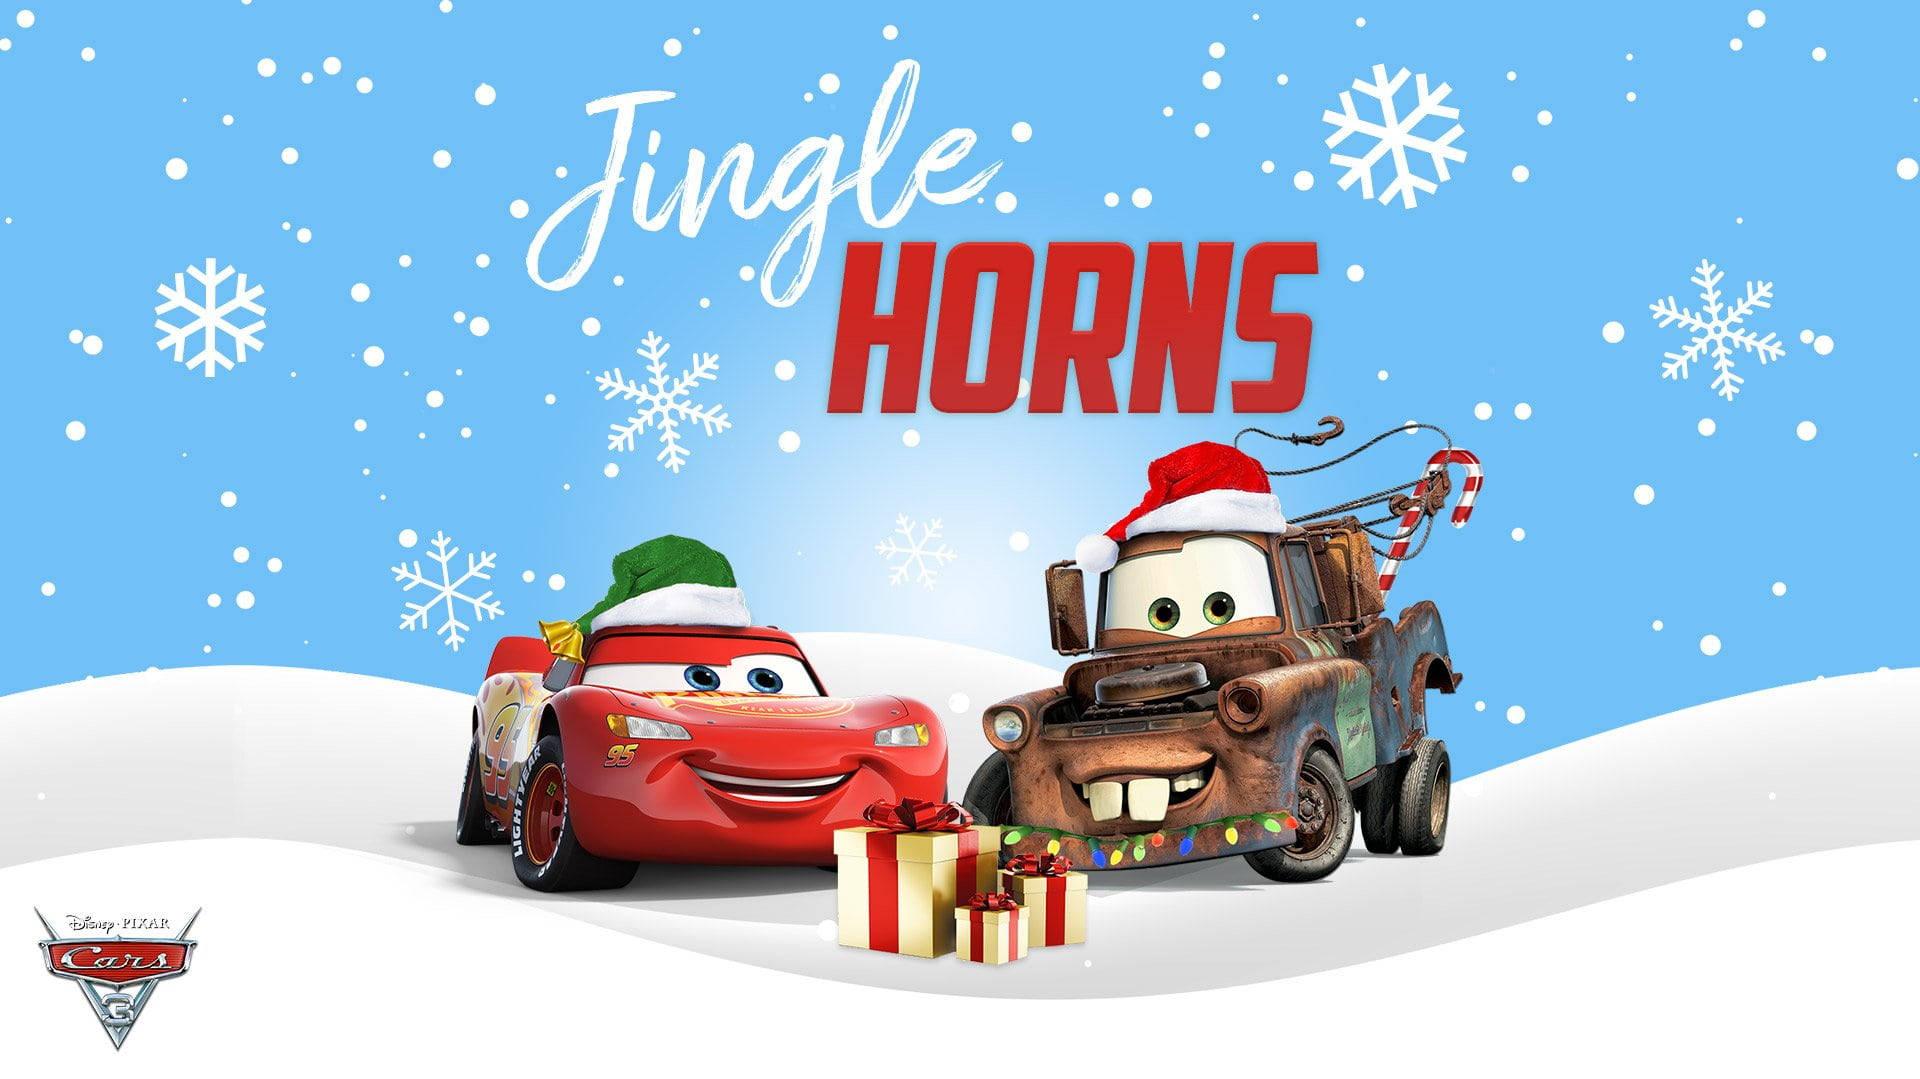 Exciting Holiday Fun With Disney Cars Characters